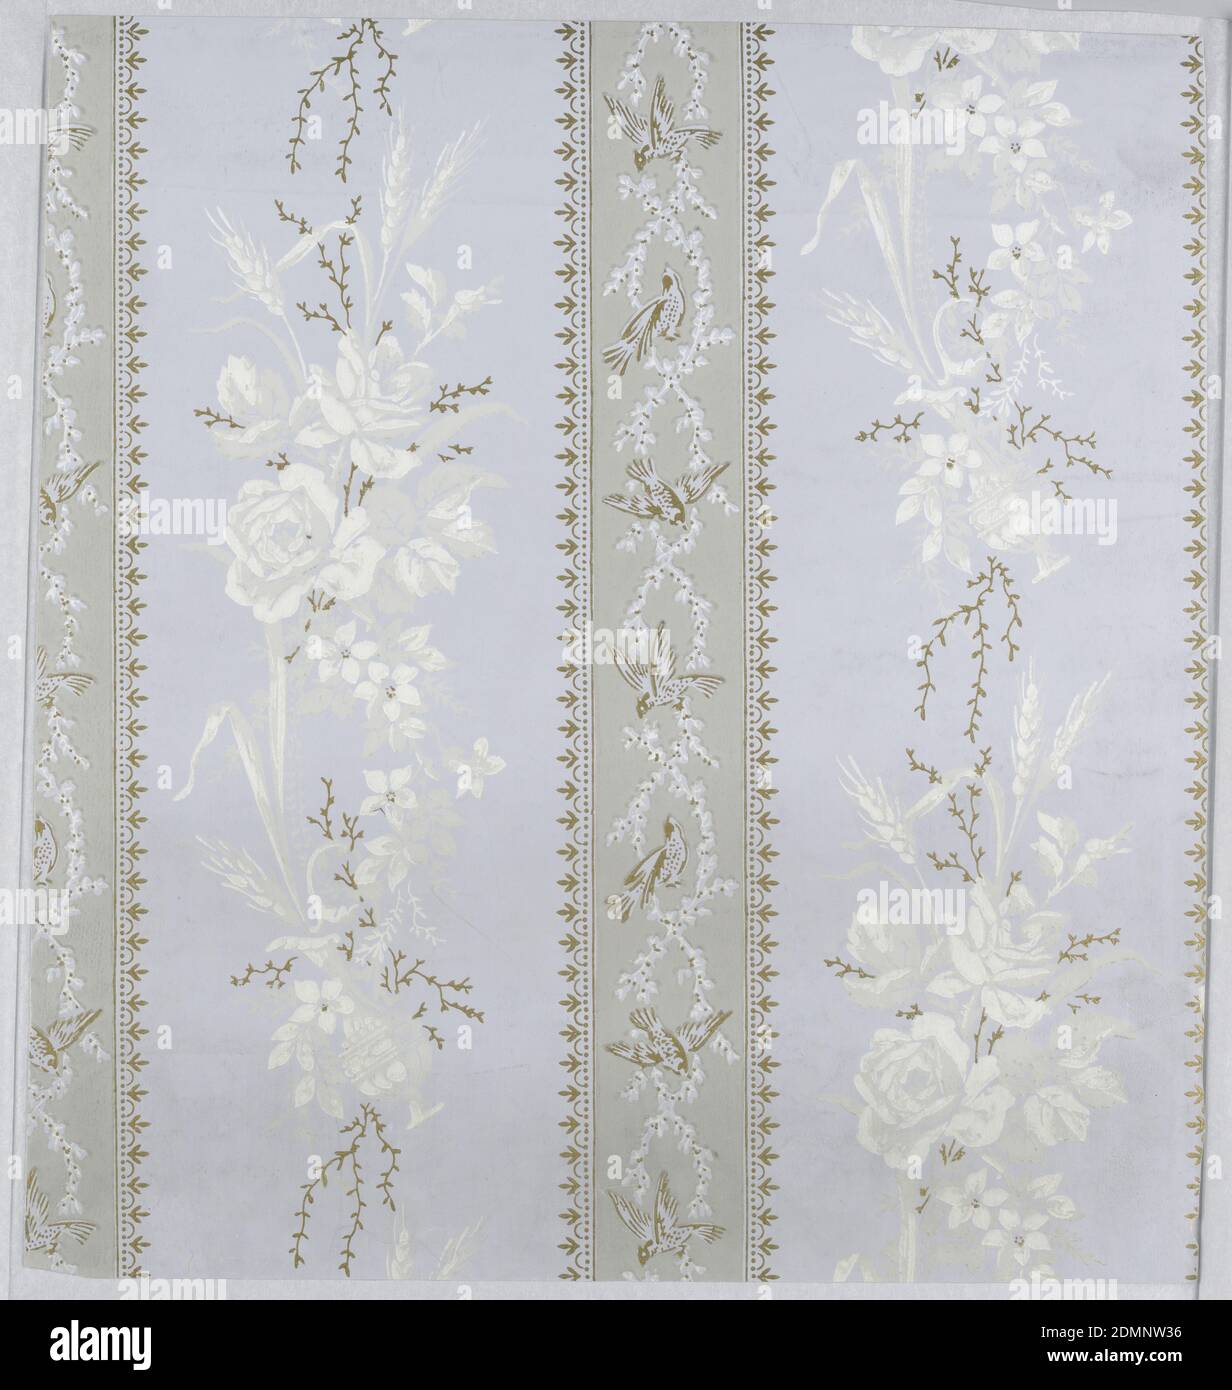 Sidewall, Machine printed on paper, Neoclassical pattern of columns of flower bouquets with roses and ears of wheat alternating with vertical ribbons with simple lace-like borders; vertical pattern in ribbon of songbirds alternating in three poses on entwined white wreaths; interiors of ribbons are grey with gold highlighting of birds and ribbon edges; flowers marked in white with some sprigs highlighted in gold; ground is light gray., USA, ca. 1880, Wallcoverings, Sidewall Stock Photo